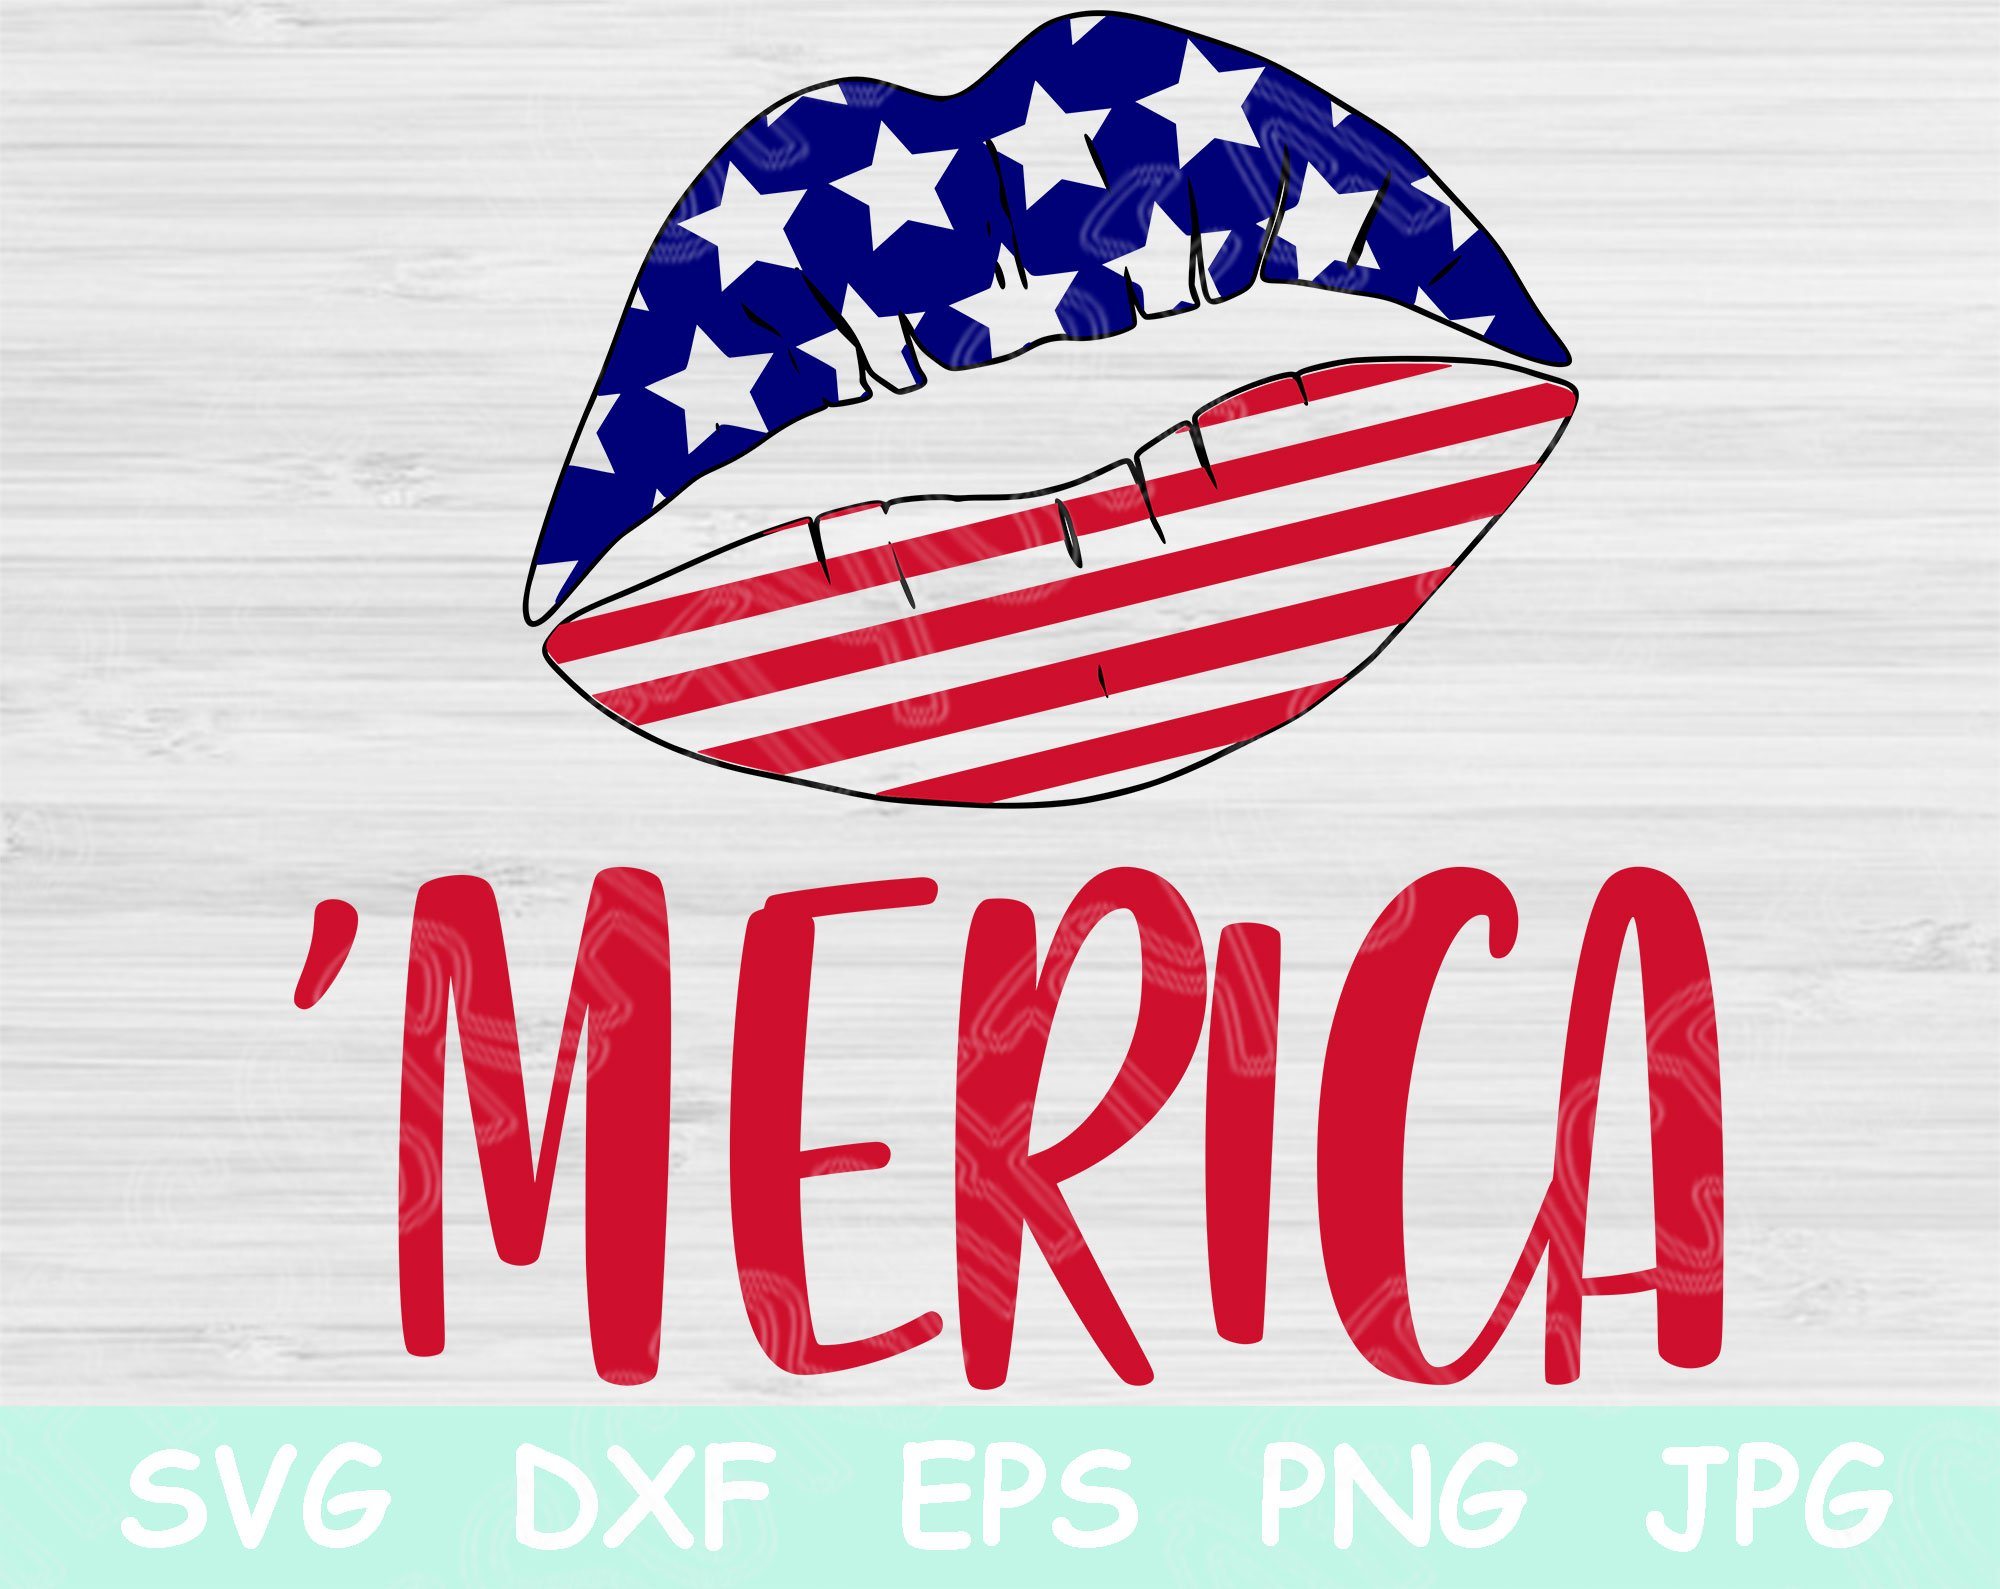 Download Merica Svg 4th Of July Svg Patriotic Svg Files For Cricut And Silhouette Independence Day Svg Merica Lips Svg Cut File Design Printable So Fontsy